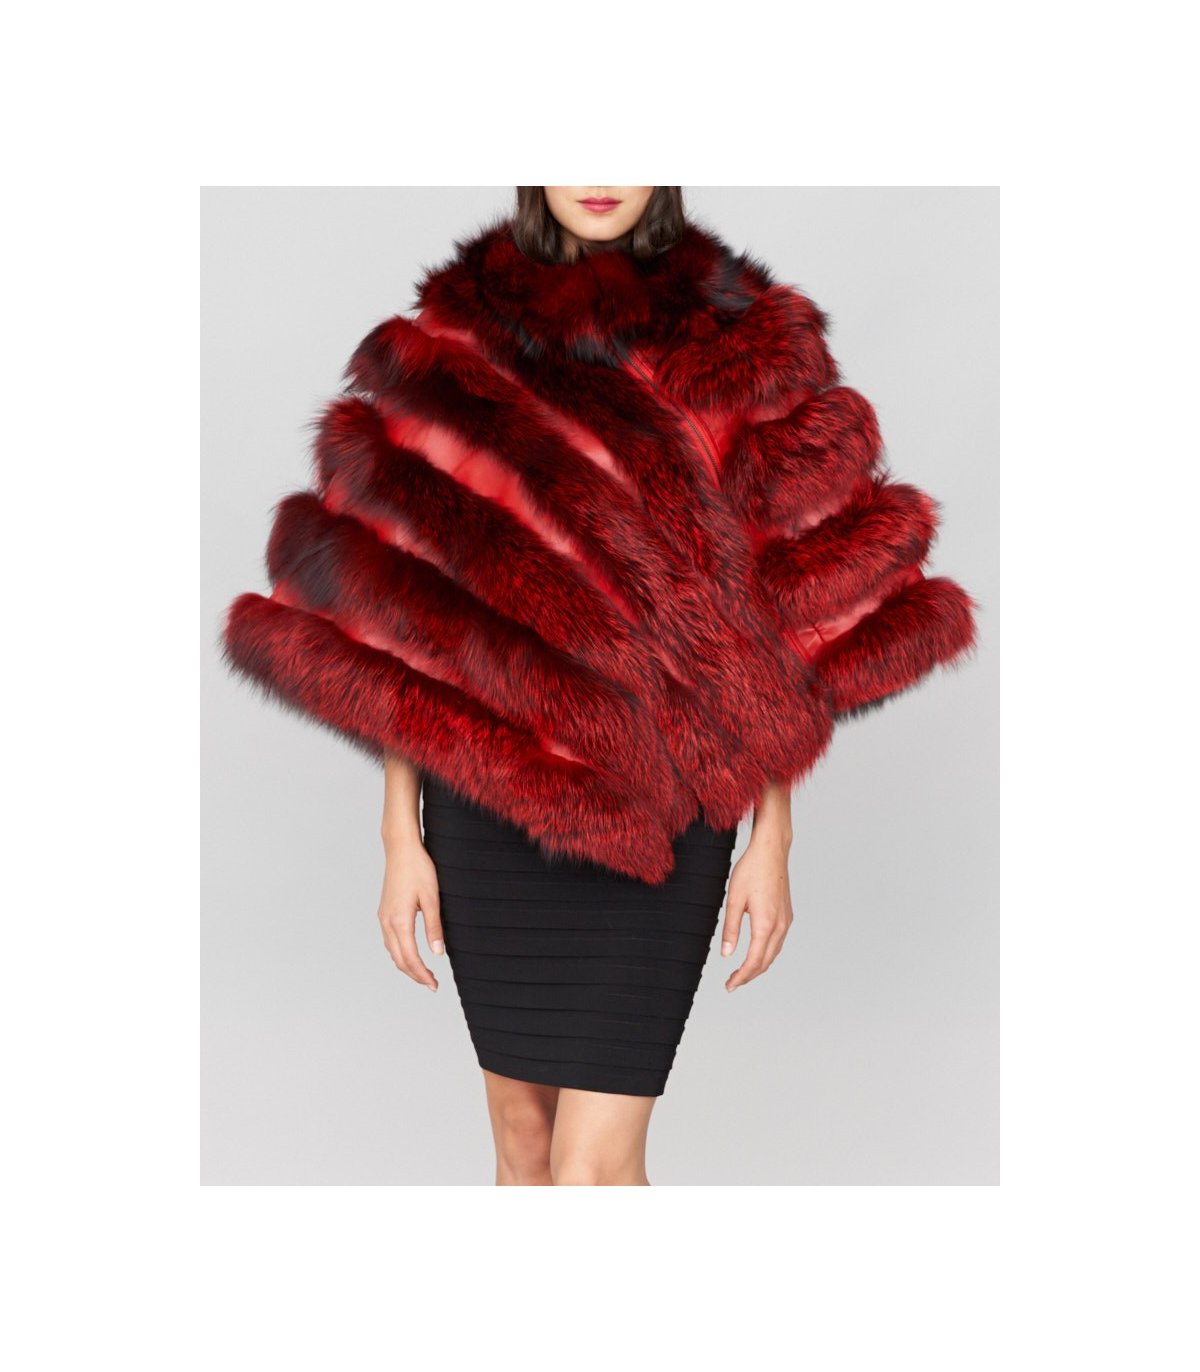 Asymmetrical Tiered Fox Fur Poncho in Red: FurSource.com